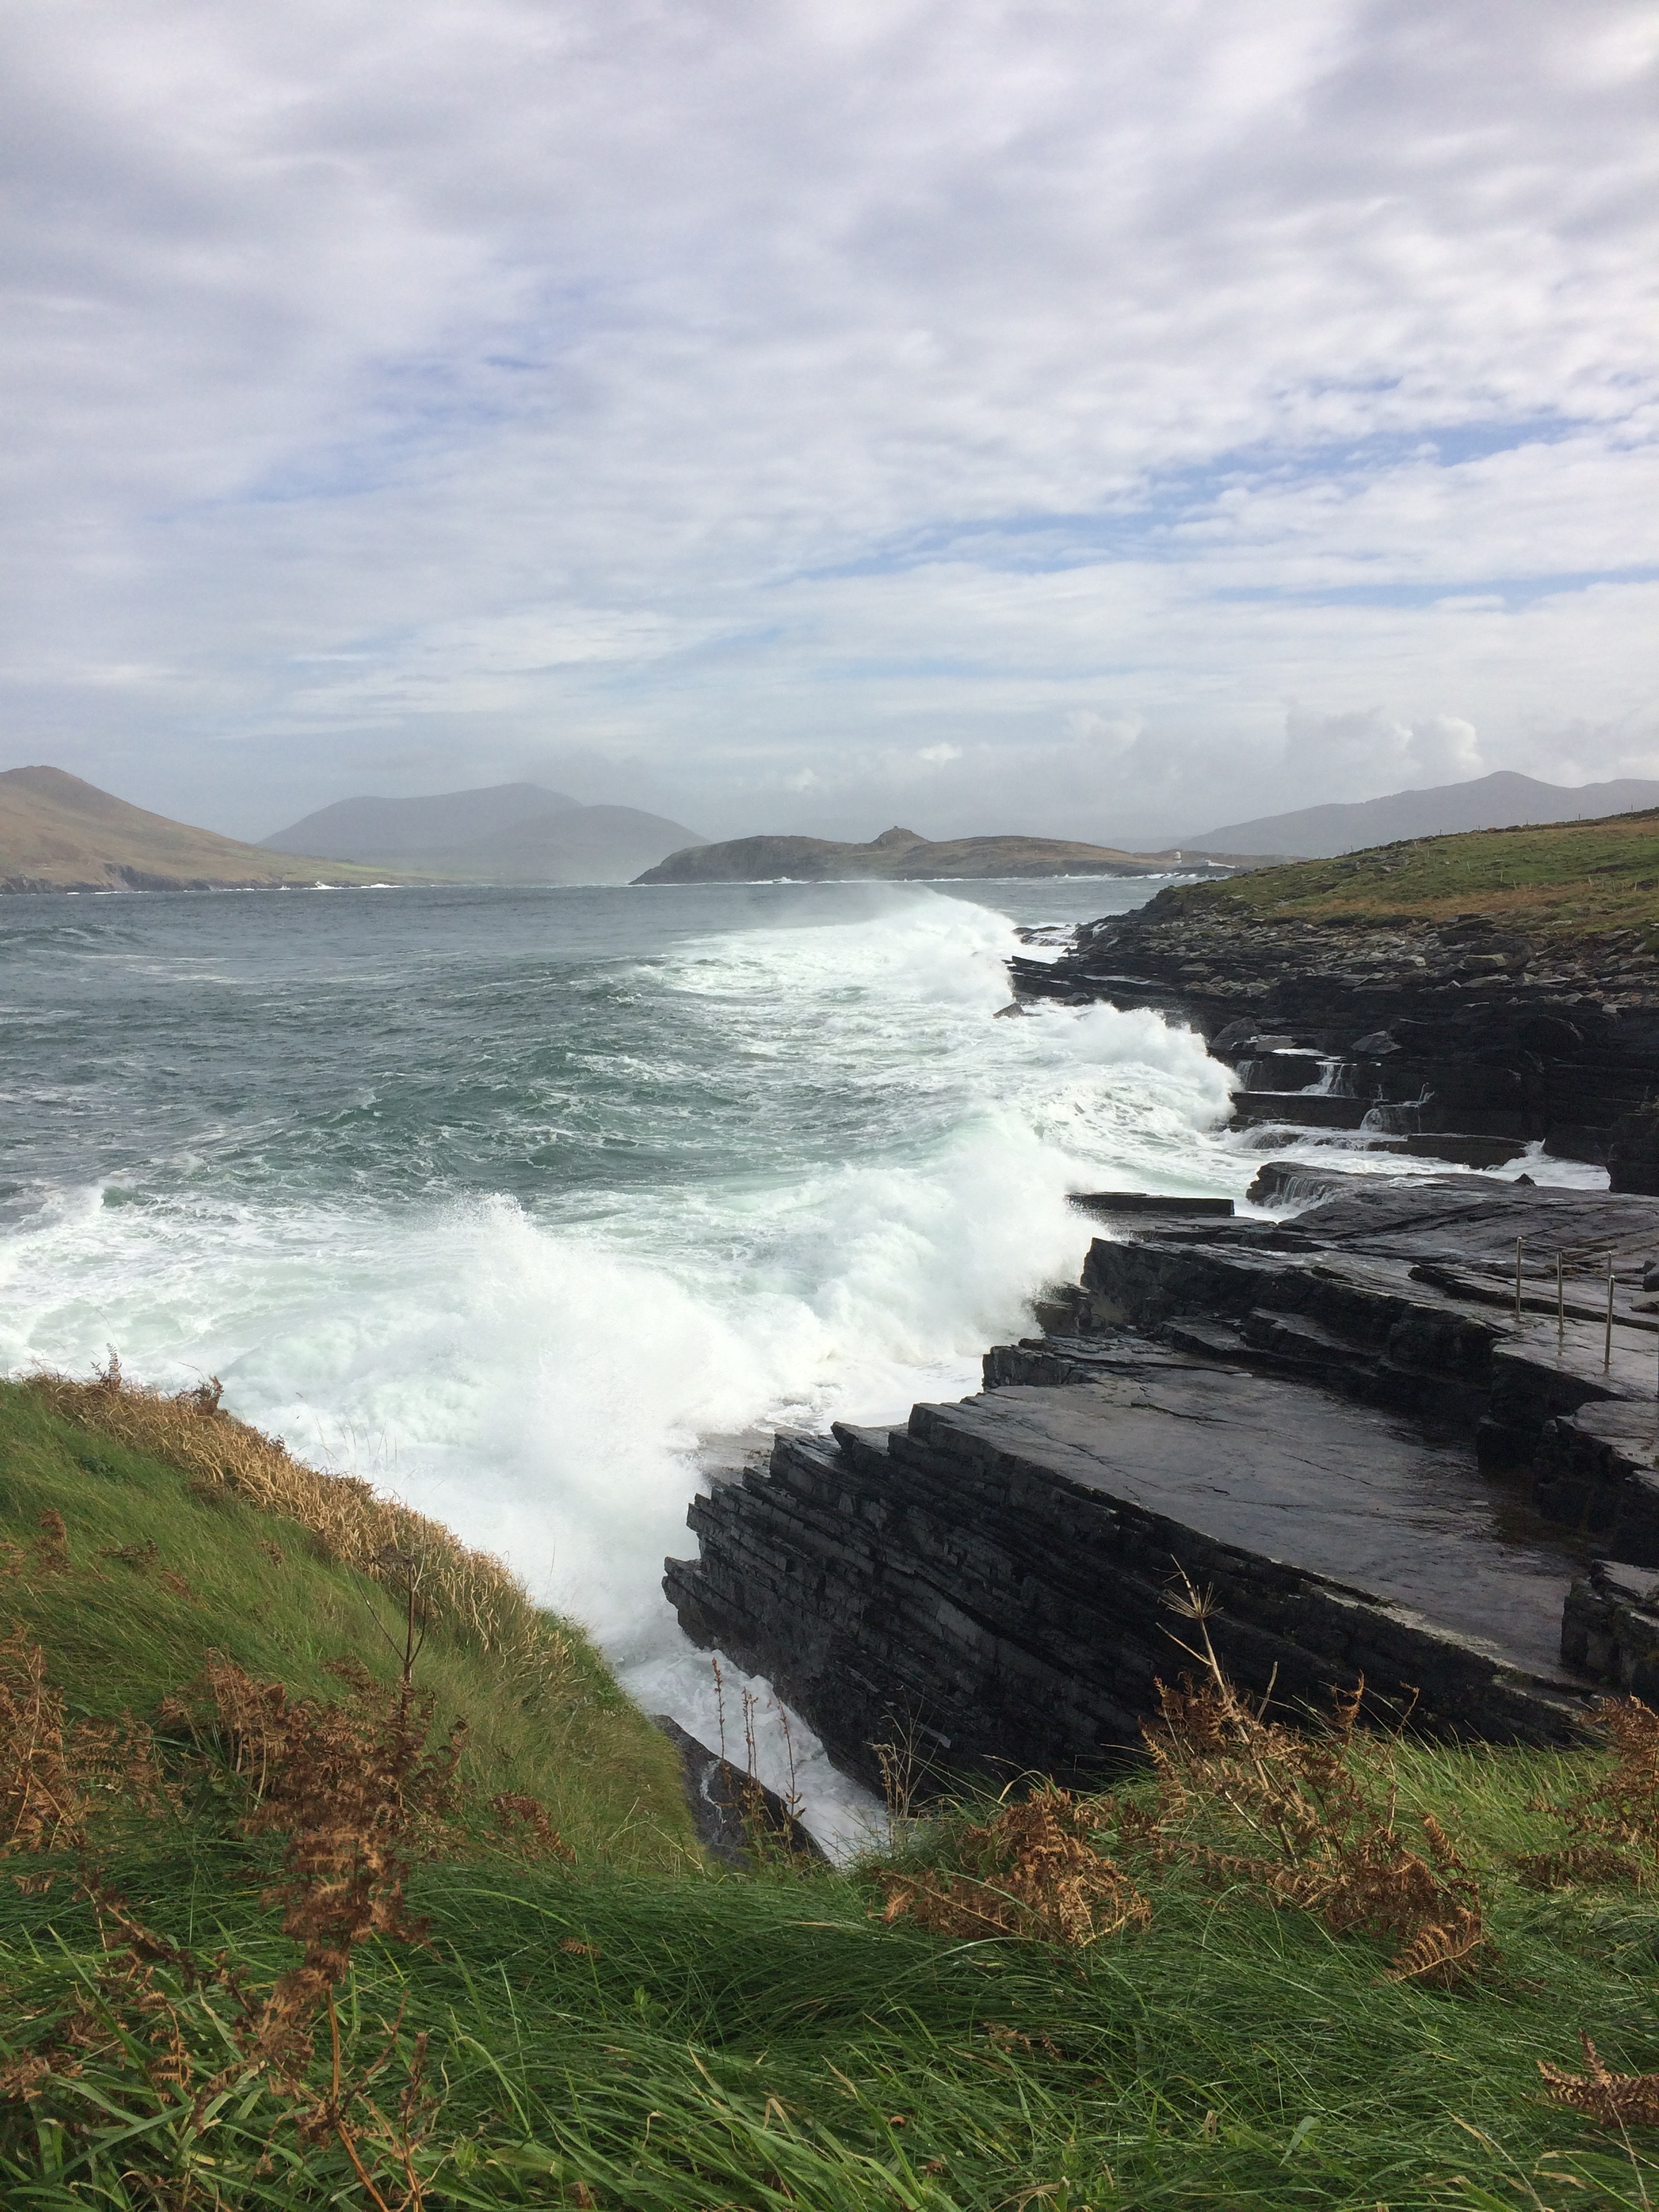 Valentia Island surrounded by the Atlantic Ocean